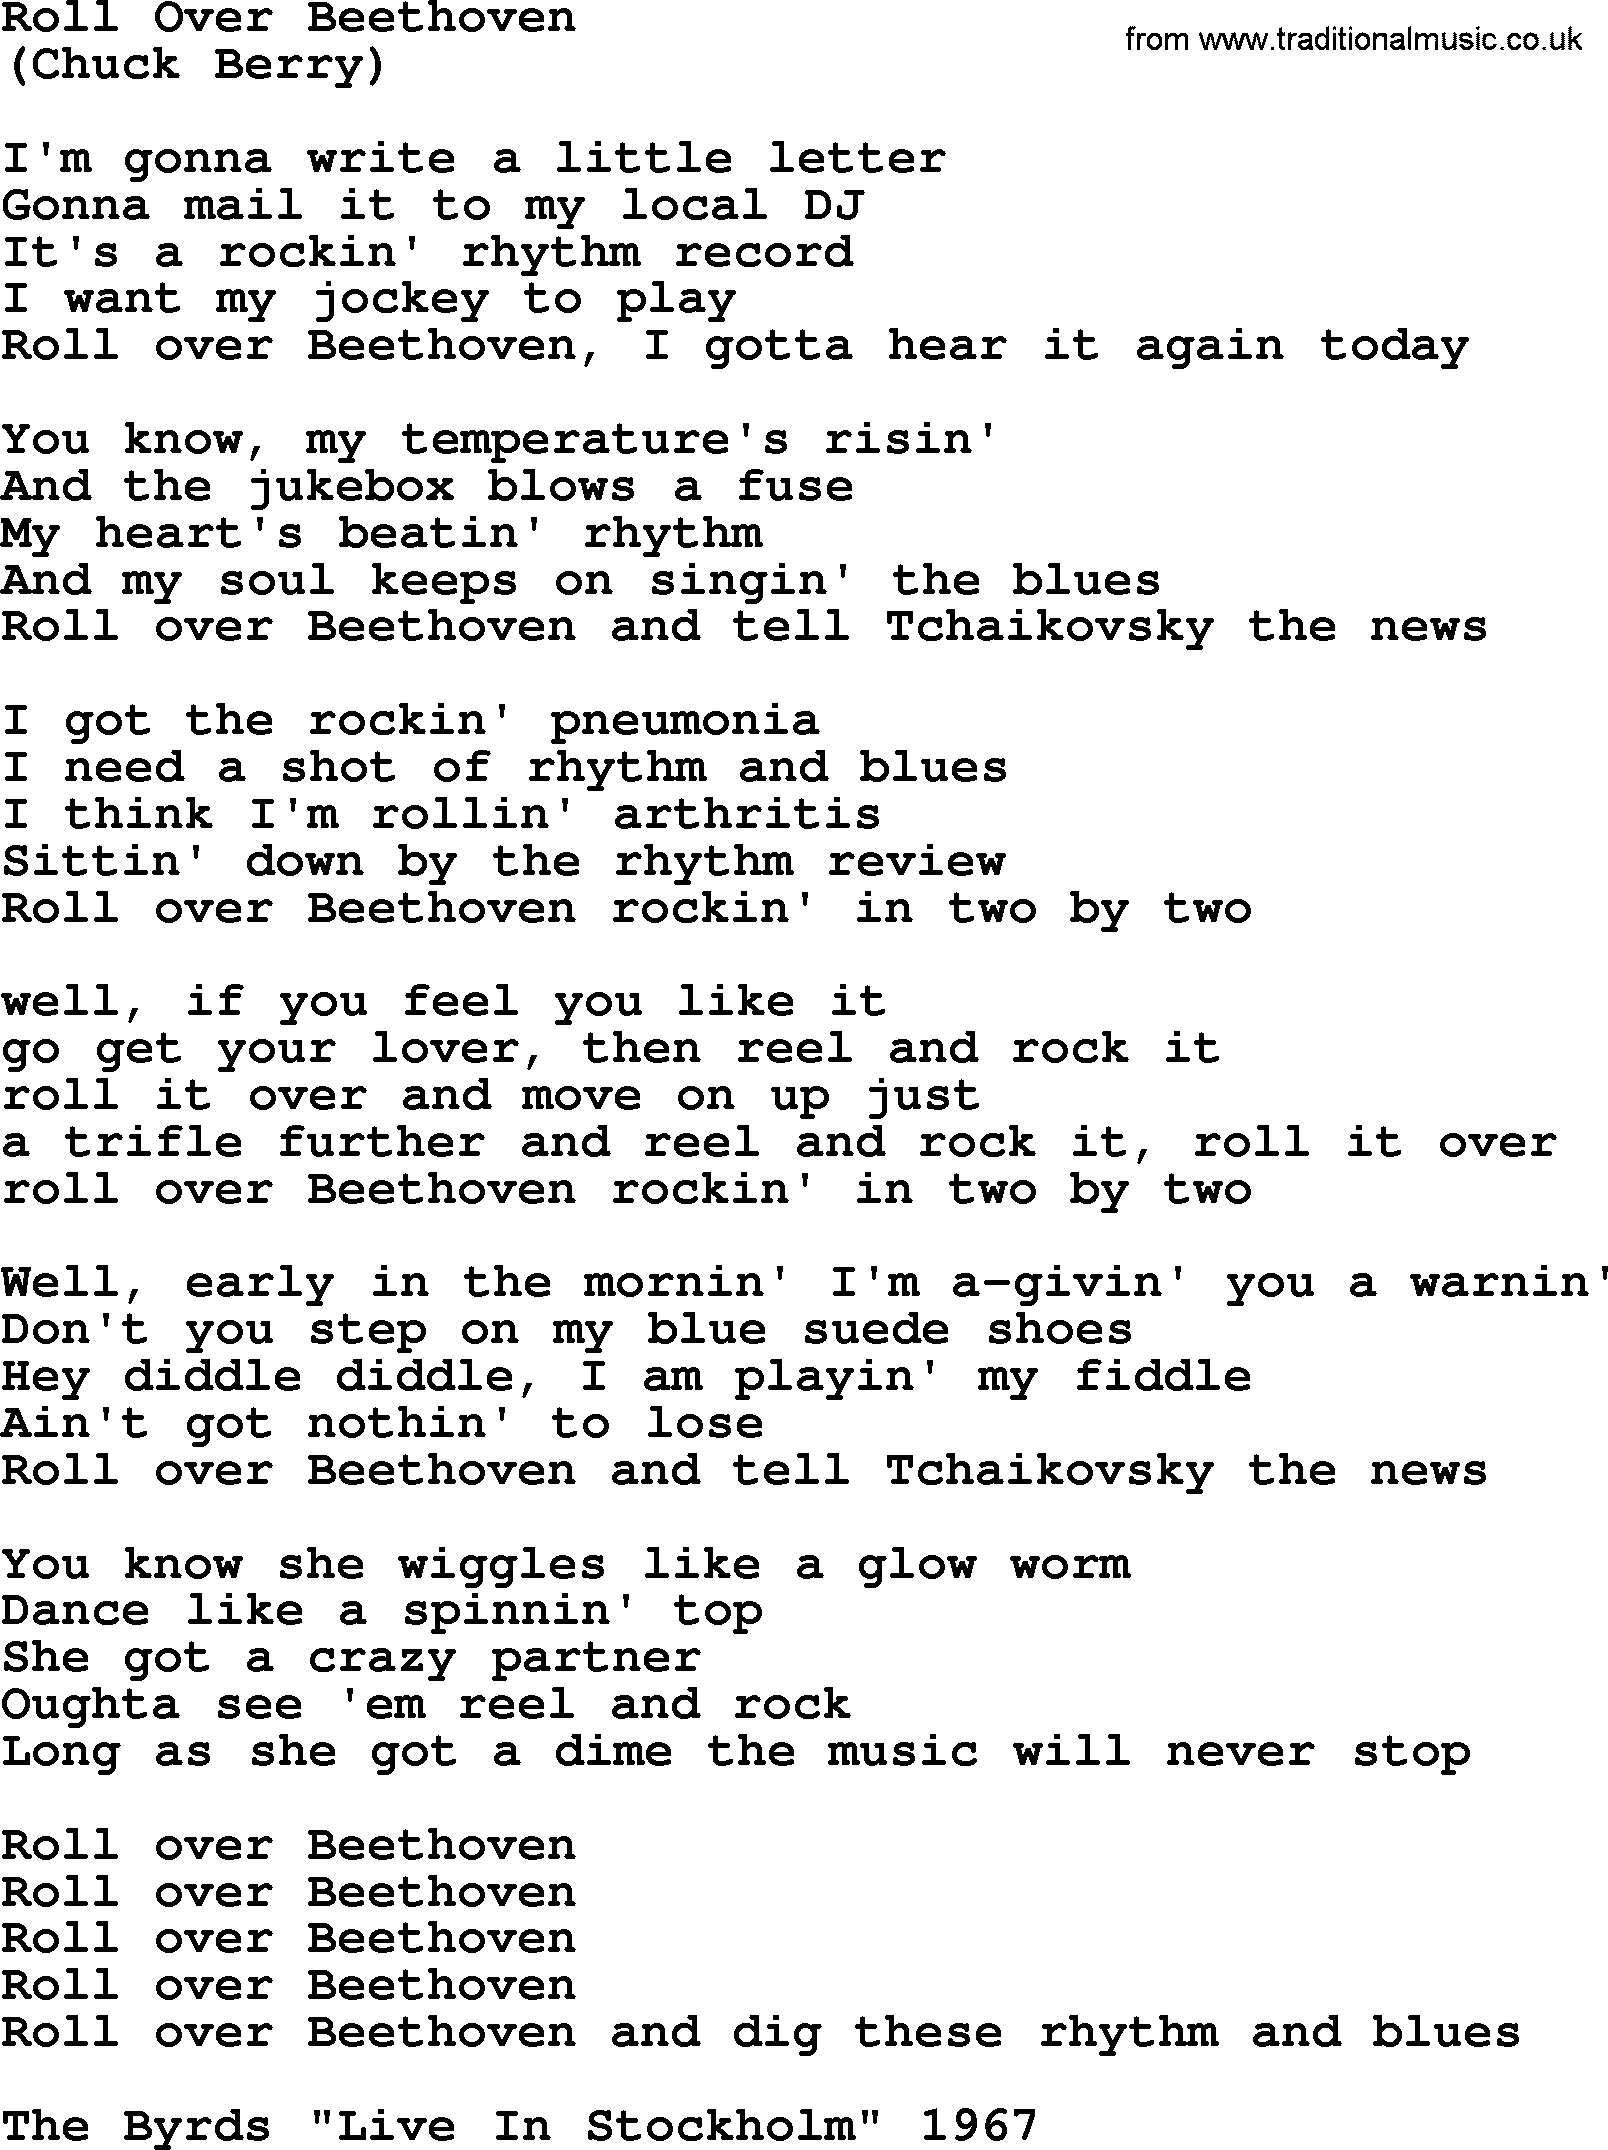 The Byrds song Roll Over Beethoven, lyrics